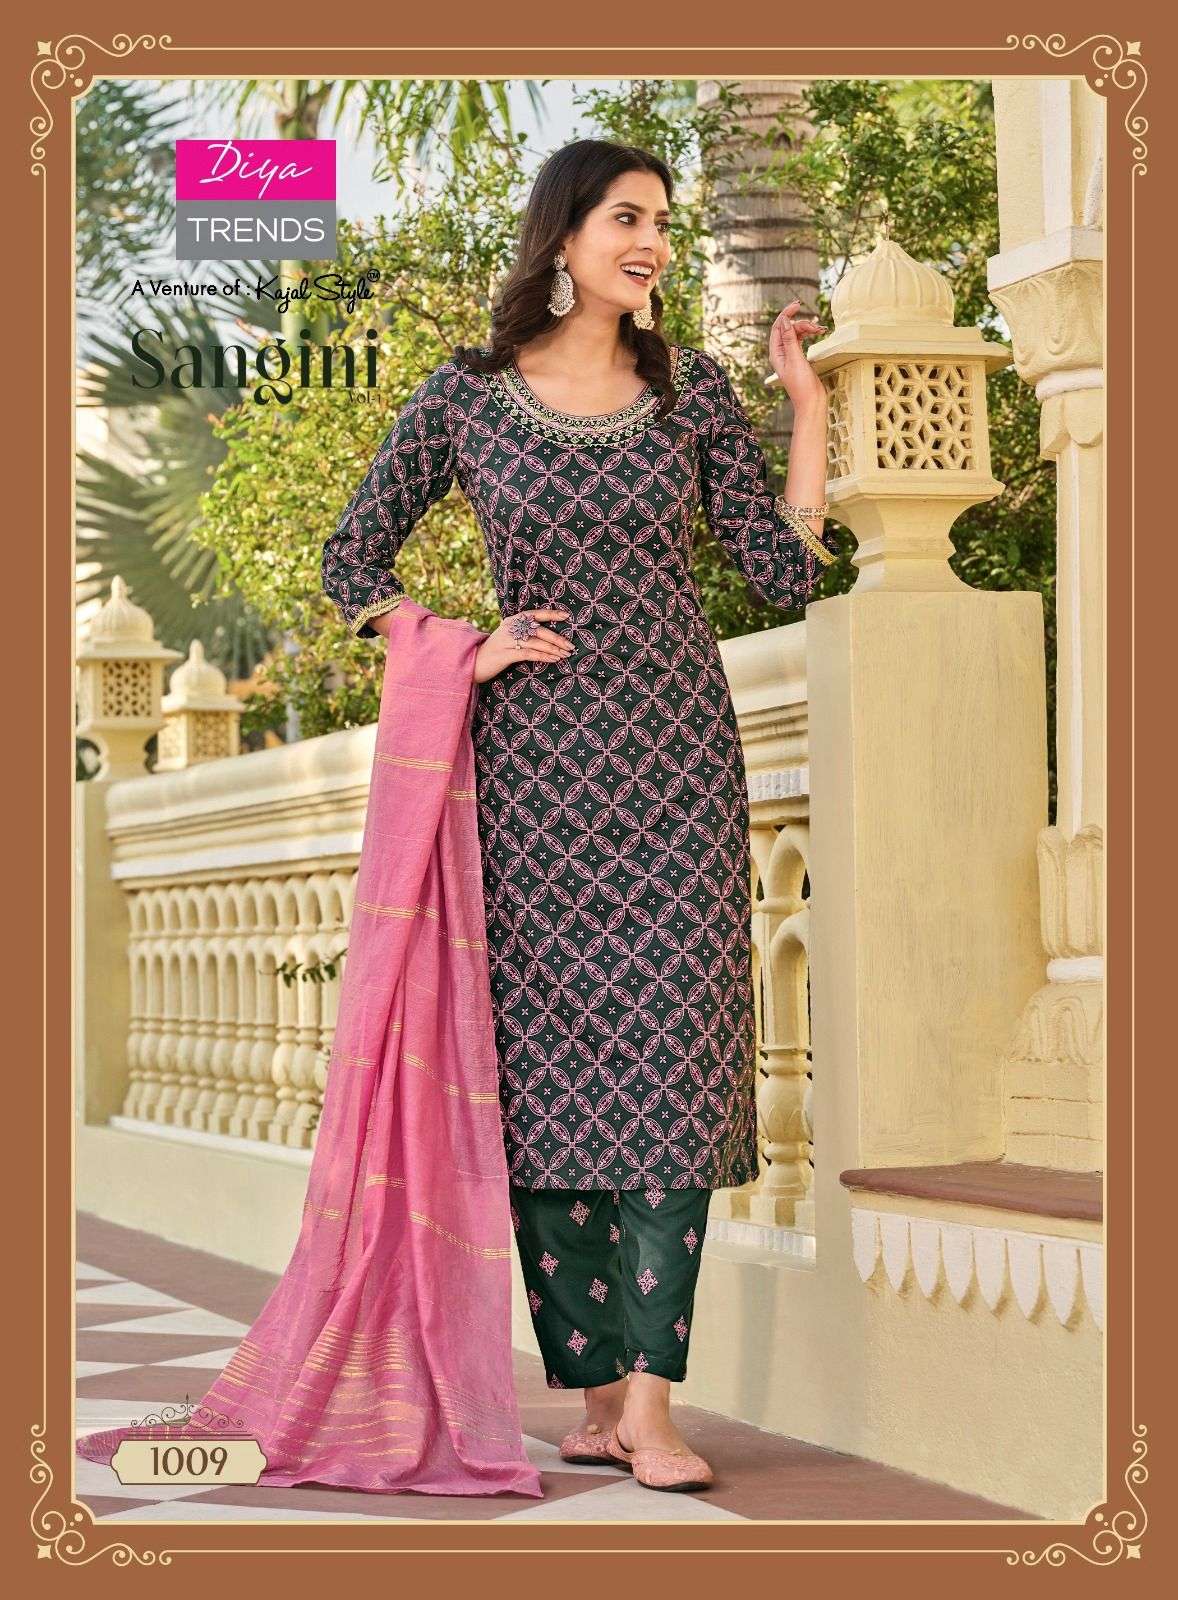 diya trends a venture of kajal style sangini vol 1 catalogue n combo packing available details pattern straight kurti pant n dupatta readymade straight dresses collection 